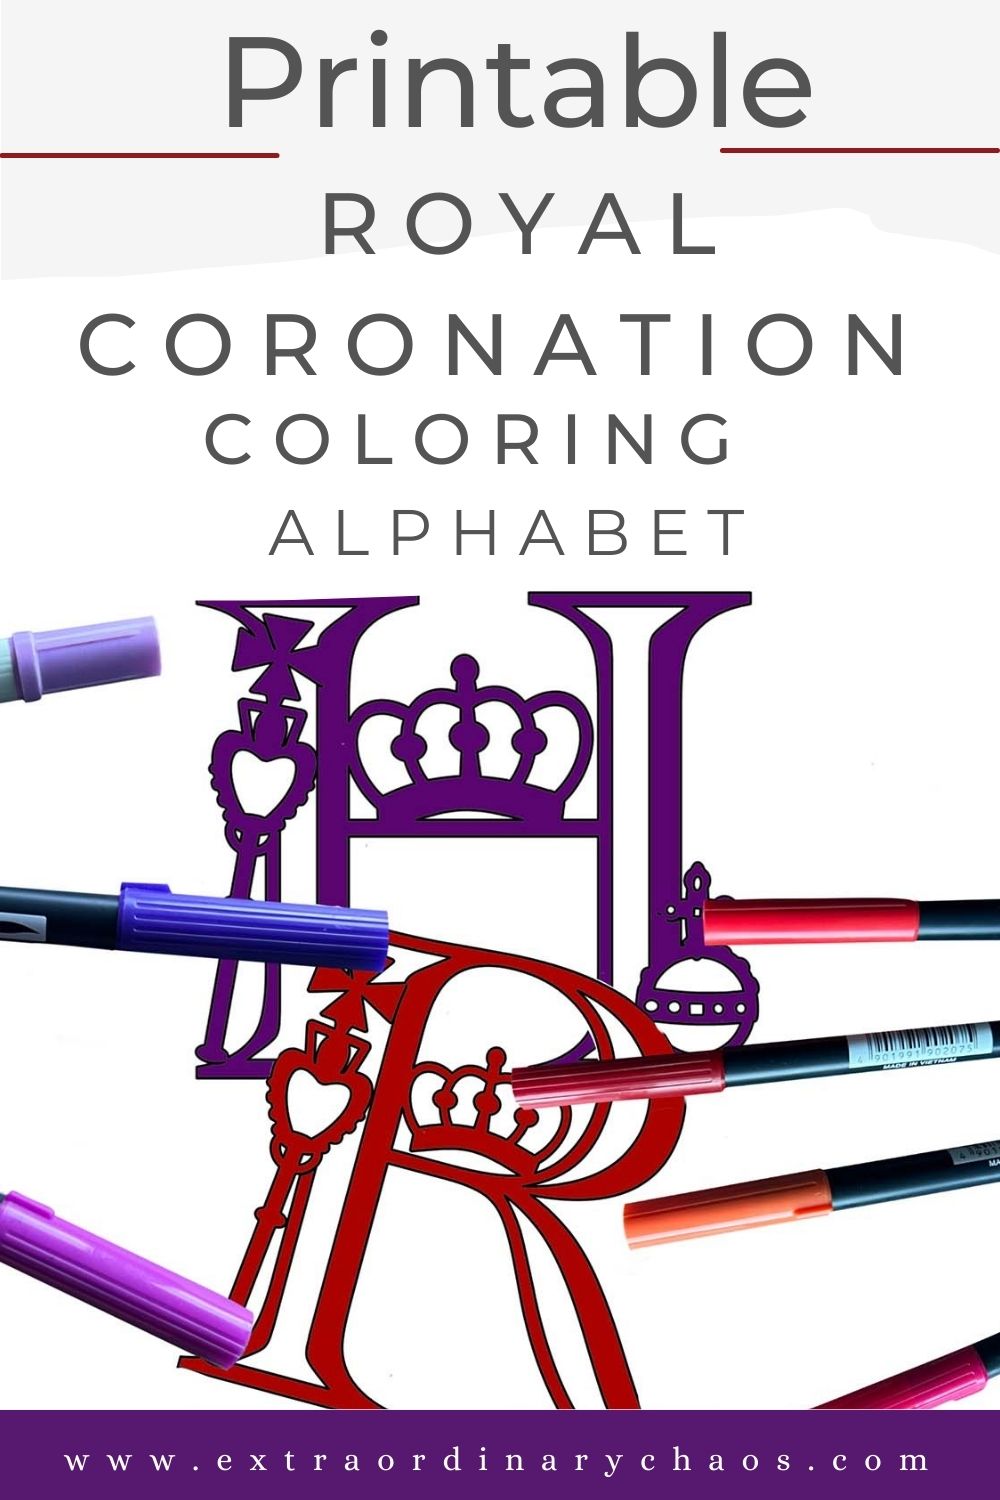 Royal Coronation ABC Coloring Alphabet and Number Set for classroom activities, home school and Royal Coronation crafts and lessons